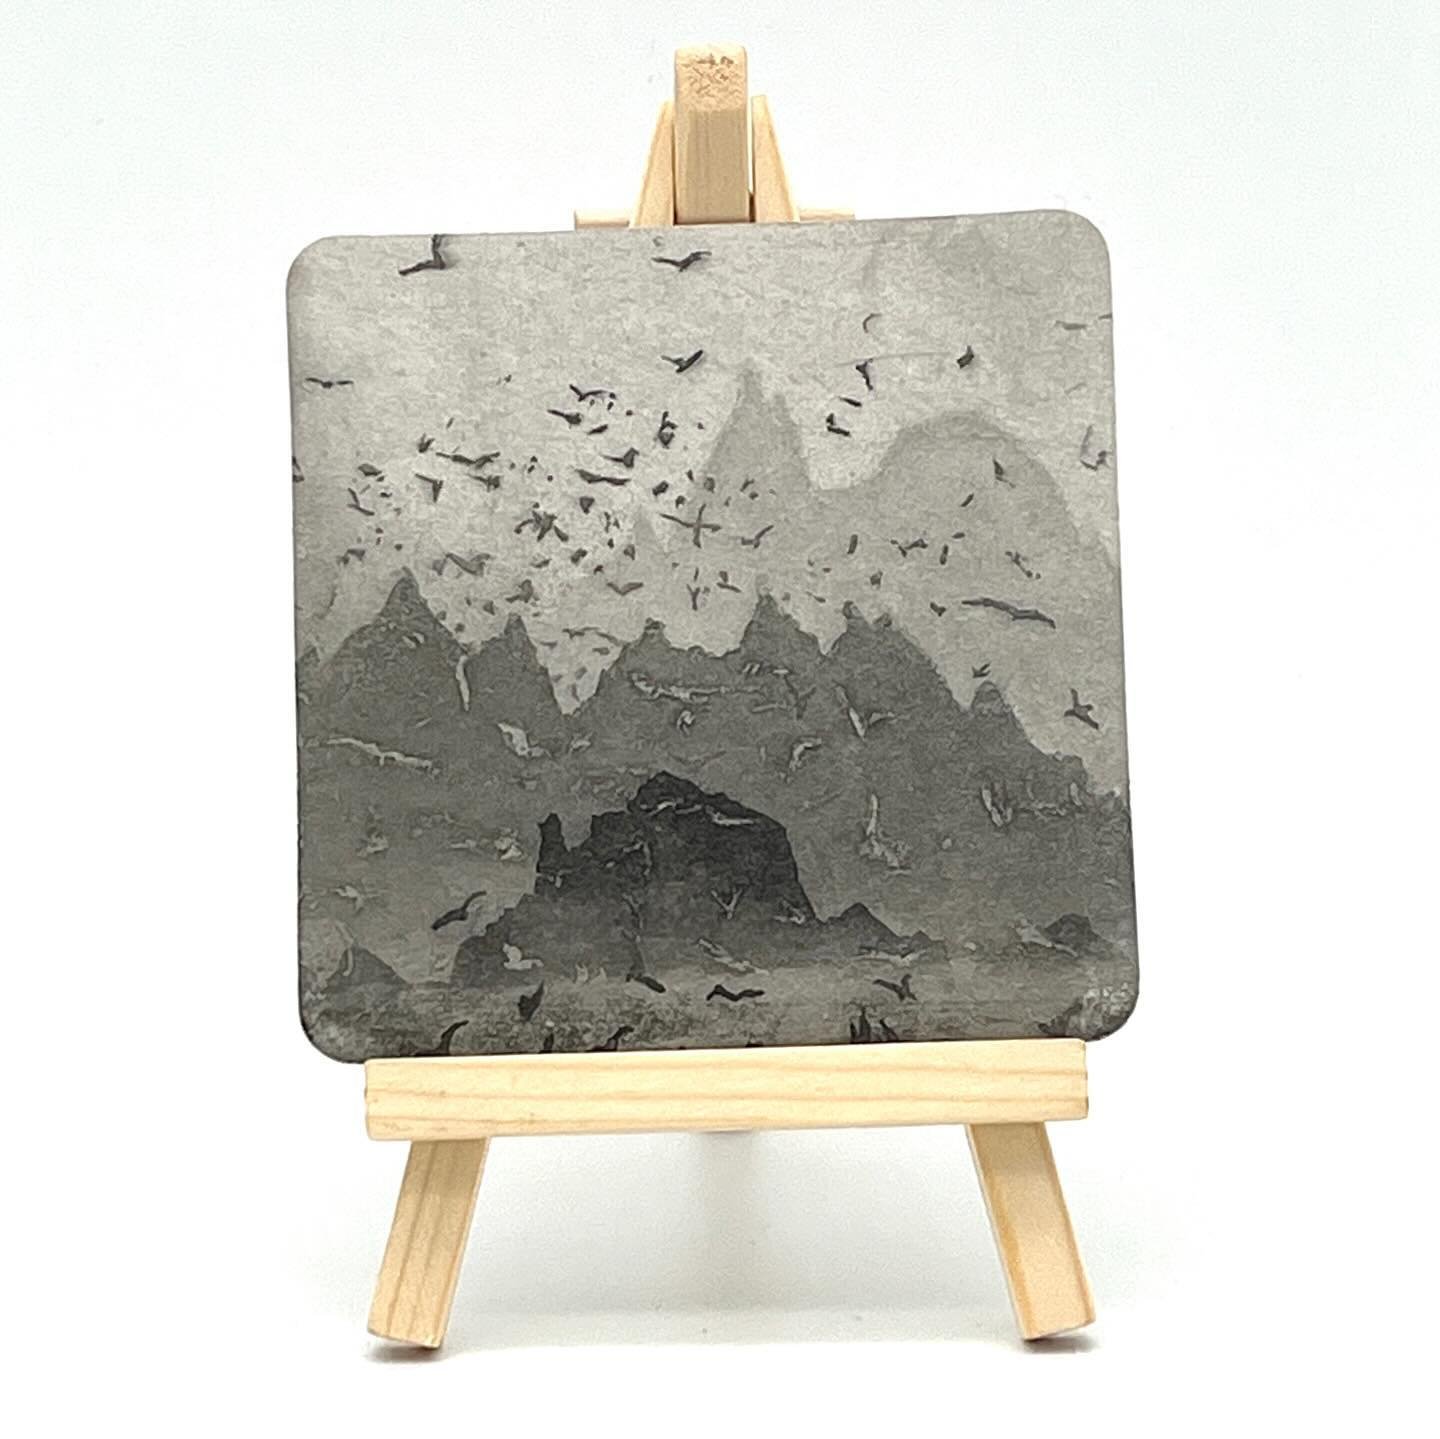 Dive into the depths of artistry with @normanackroyd original beermat art, now open for bidding! Make sure to place your bid before the 26th by clicking the link in our bio.

A profound thank you to Norman Ackroyd for donating his stunning pieces to 